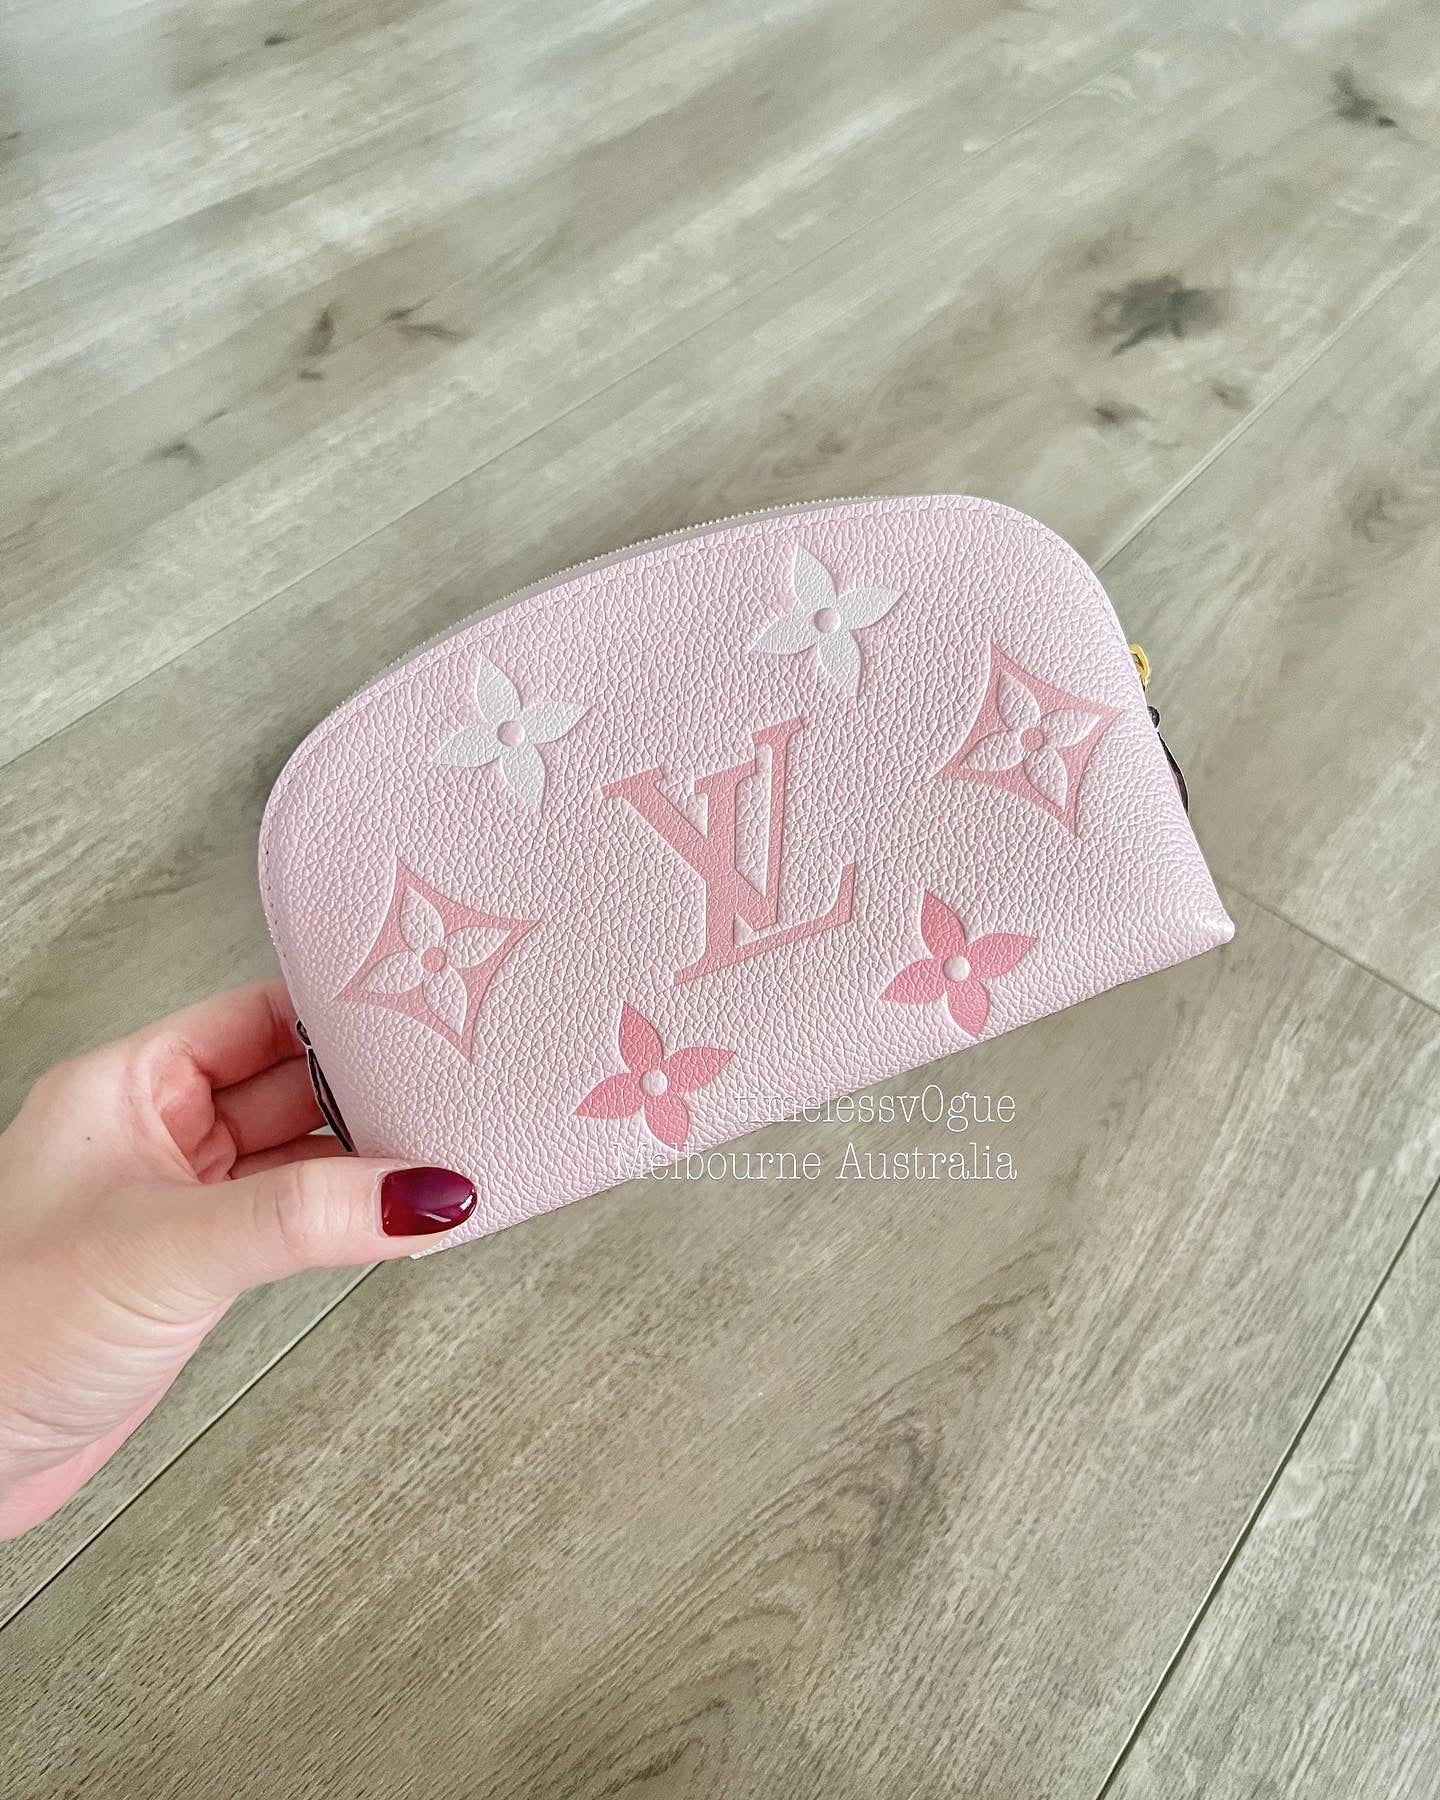 Louis Vuitton Pink Monogram Empreinte Leather by The Pool Cosmetic Pouch